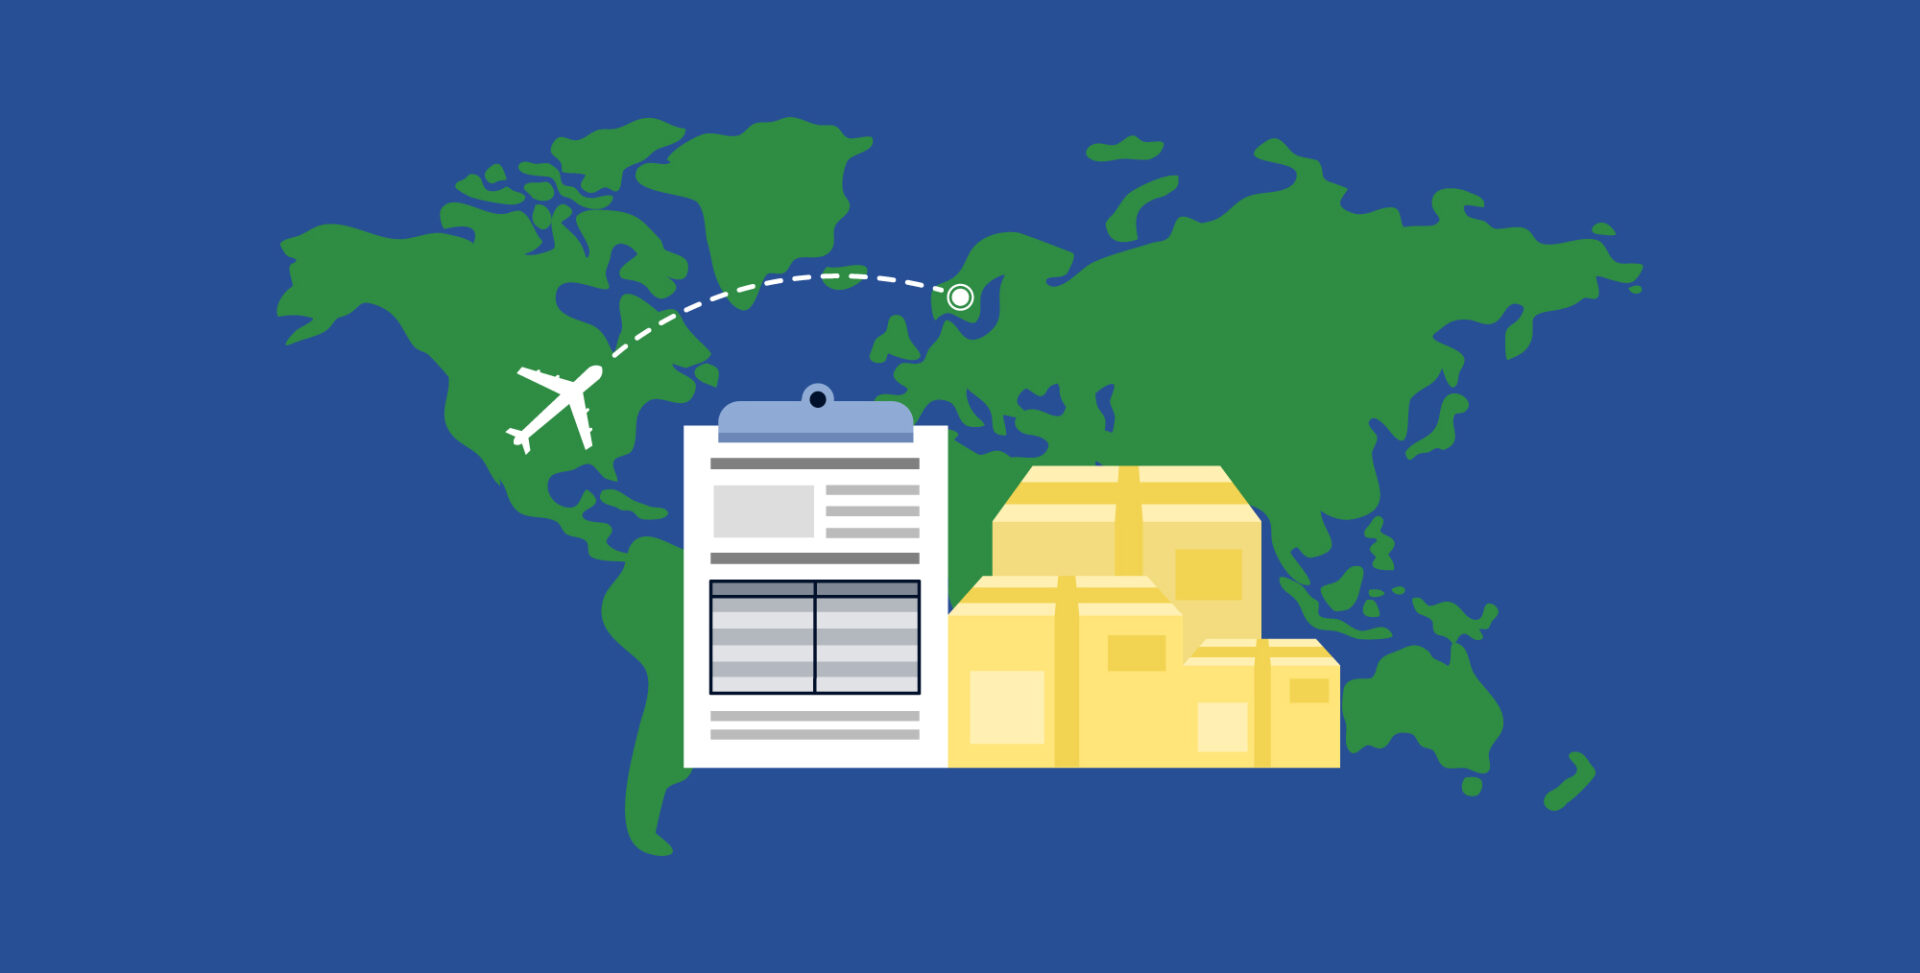 Learn how to expand your business's reach and start shipping internationally!